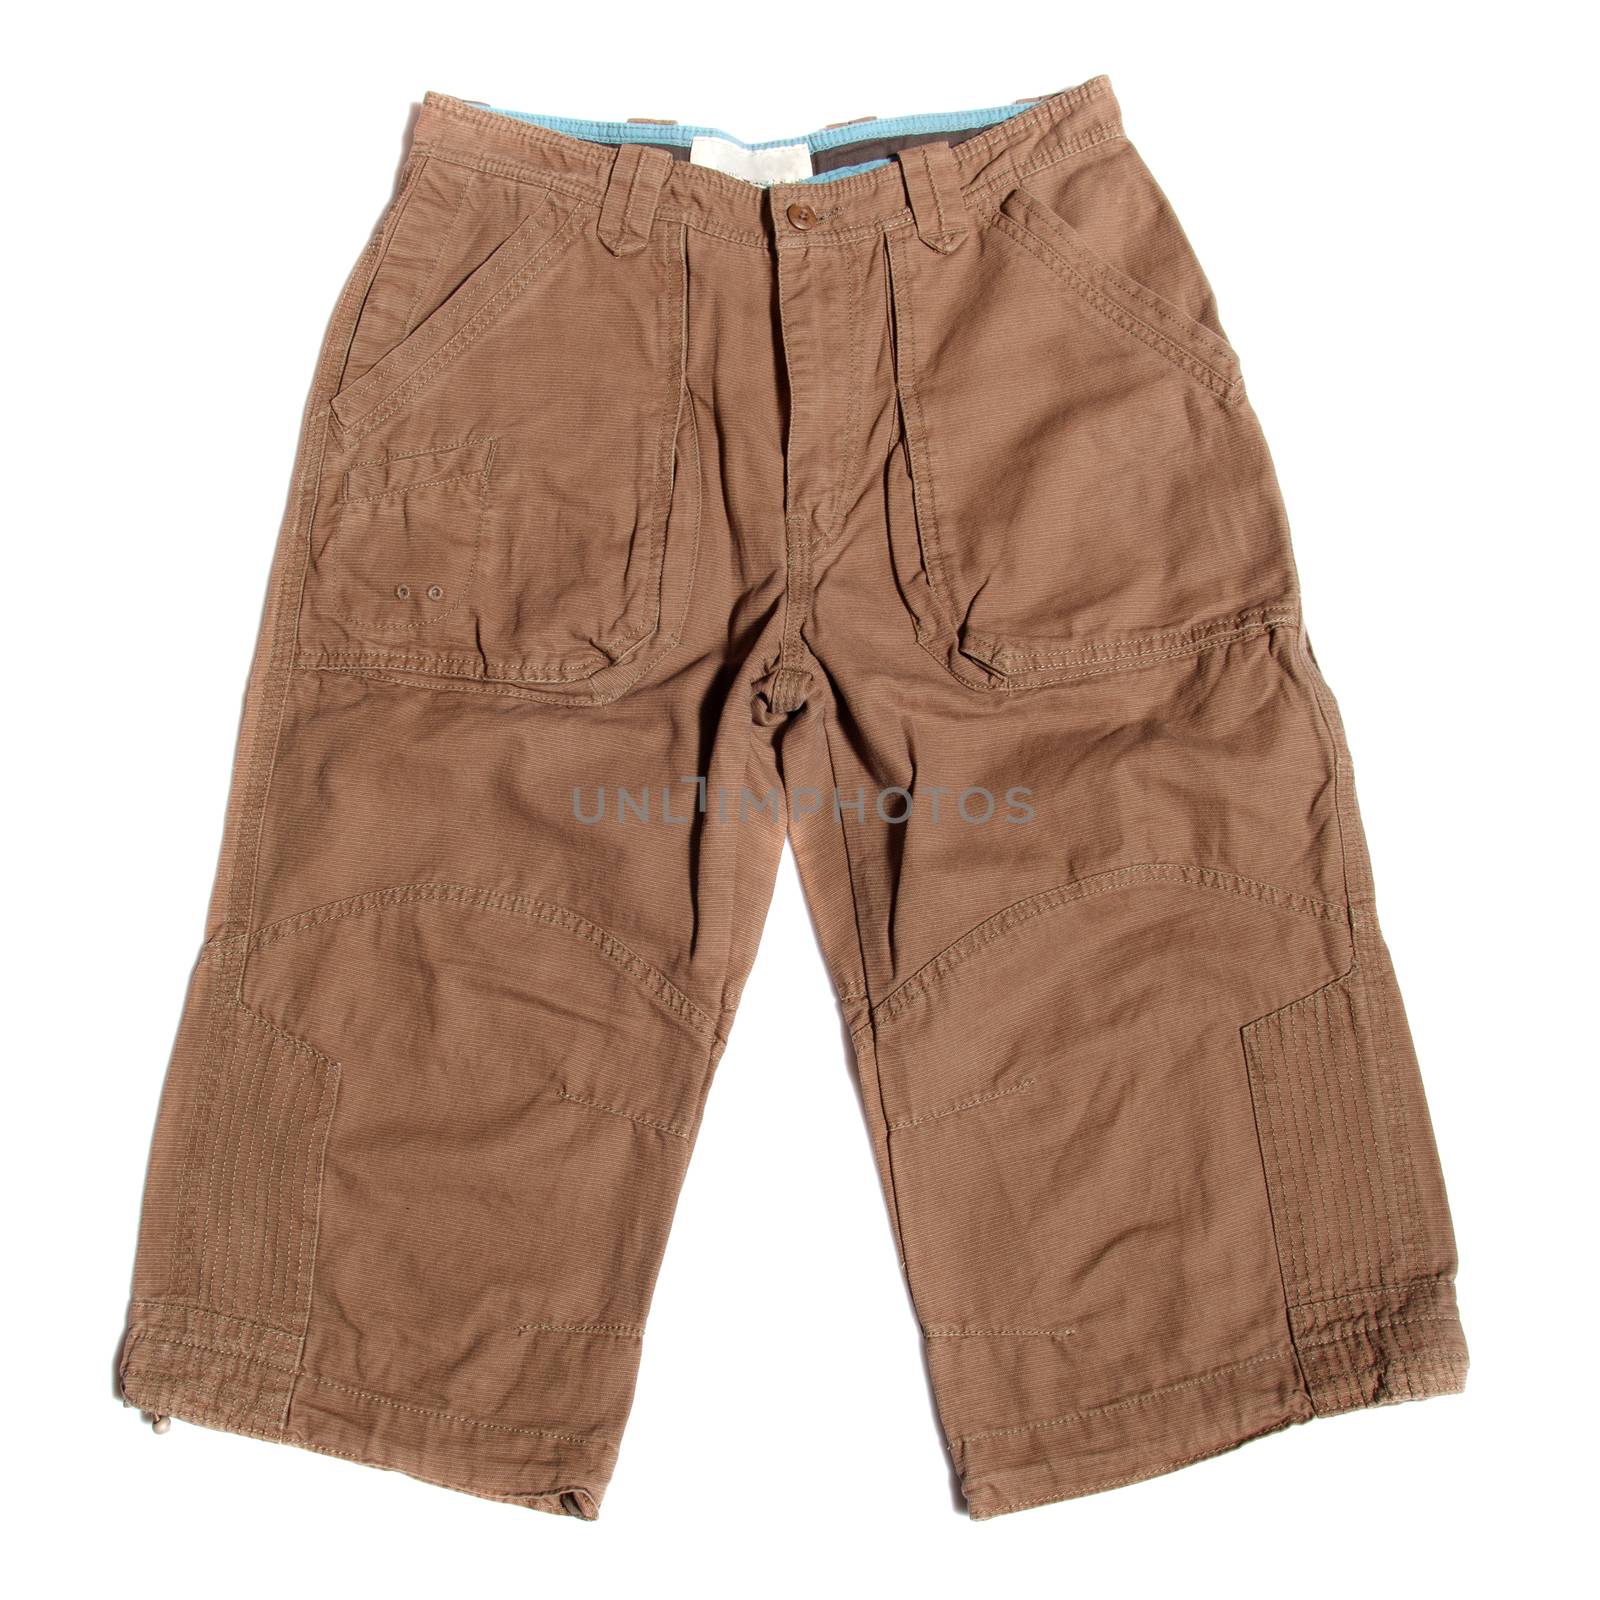 Men's shorts by AigarsR